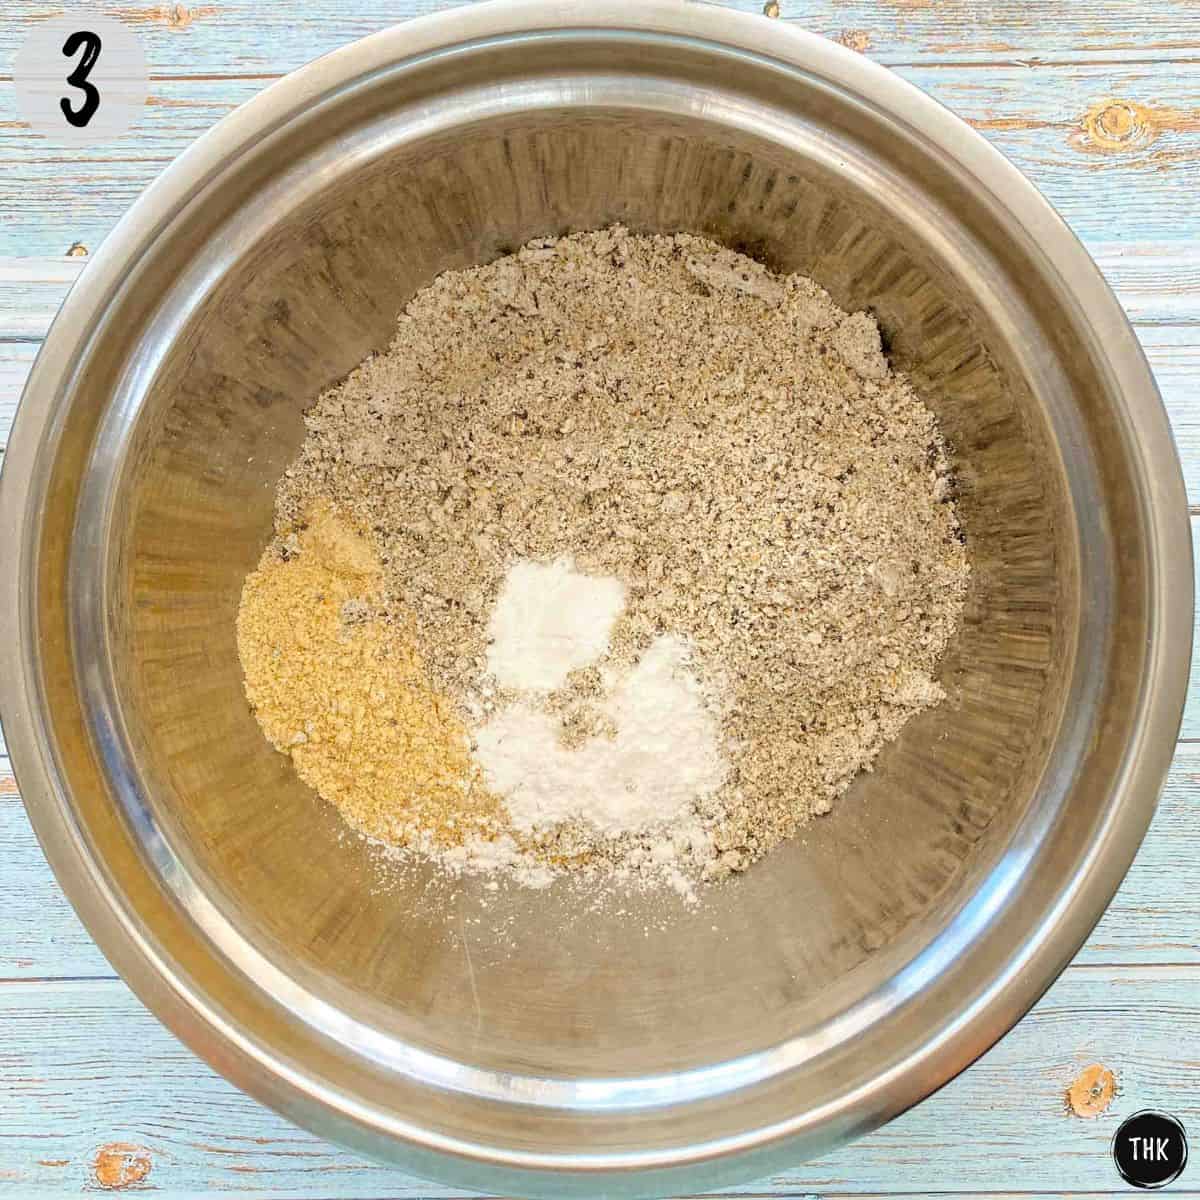 Mixing bowl with chickpea flour, ground oats, baking powder and chia seeds.